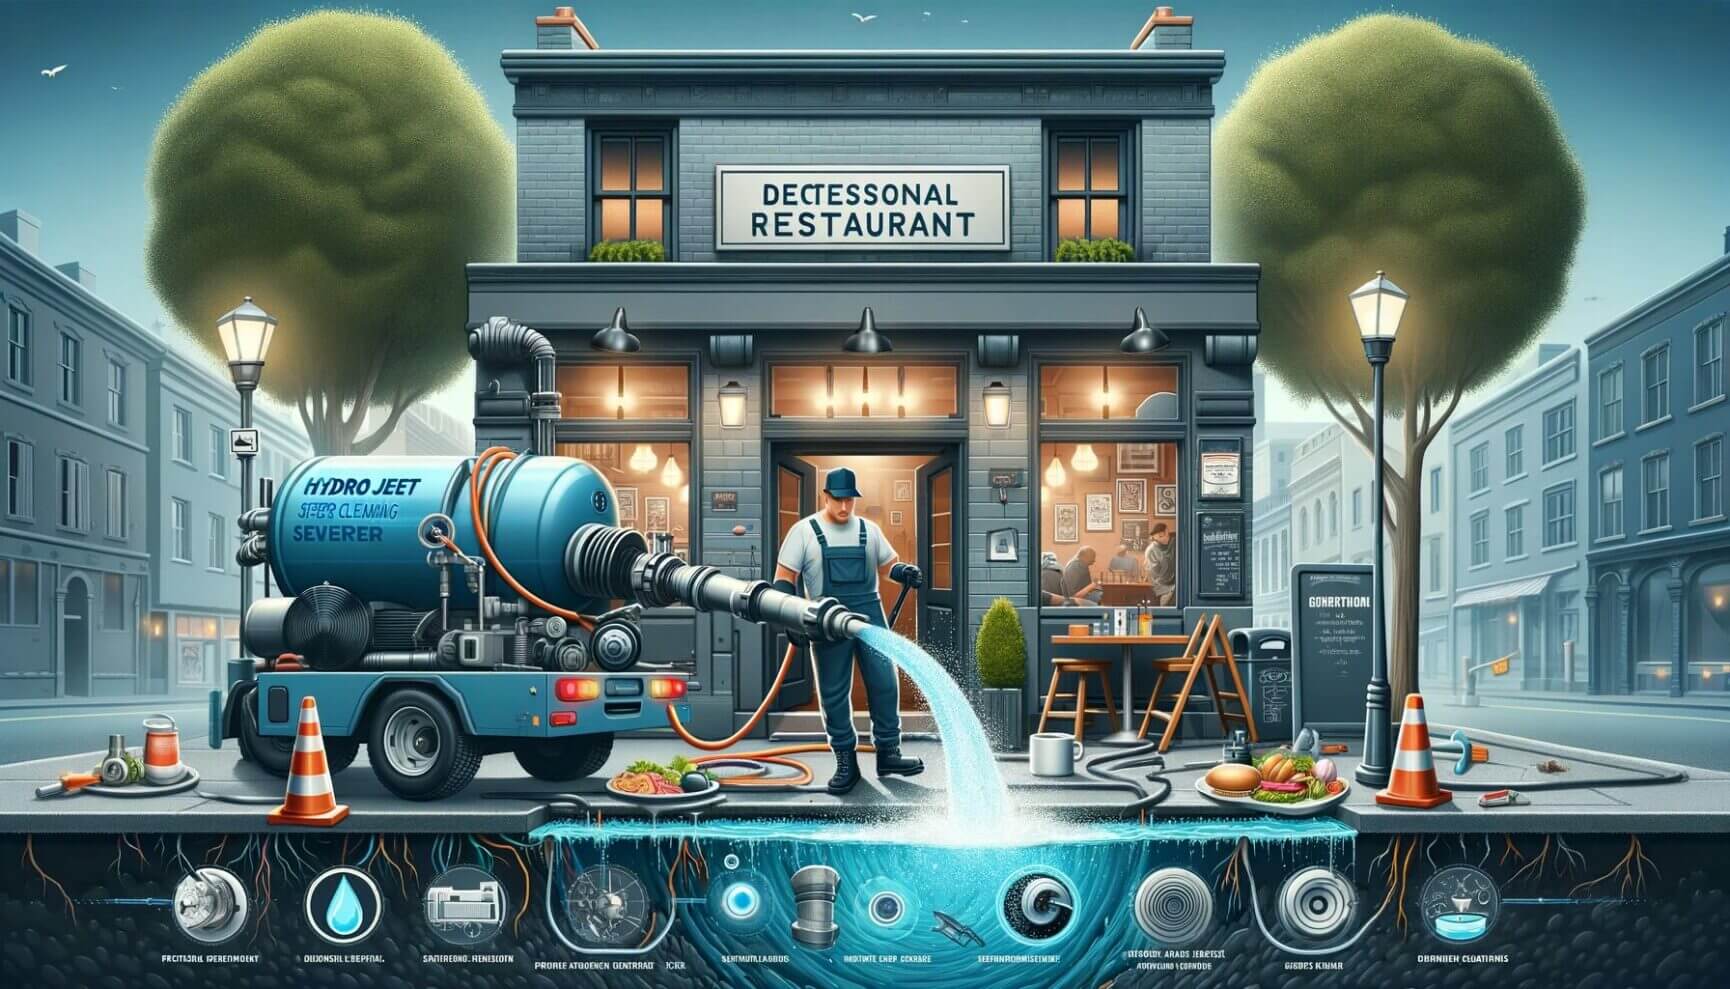 An illustration of a man cleaning a restaurant with a water hose.